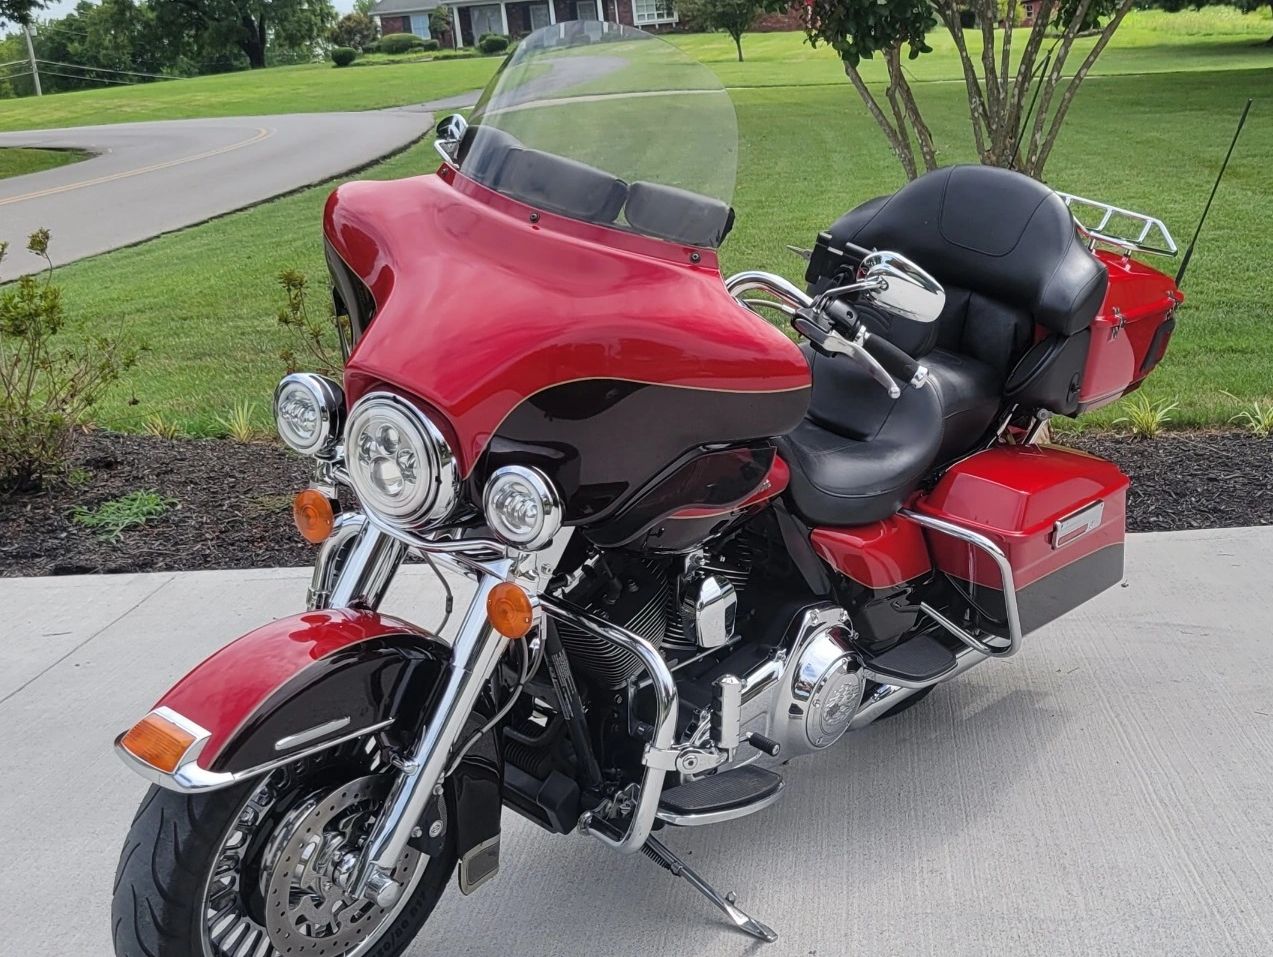 Harley-Davidson Ultra Limited for rent in Maryville, TN 
Freedom Rentals of TN 